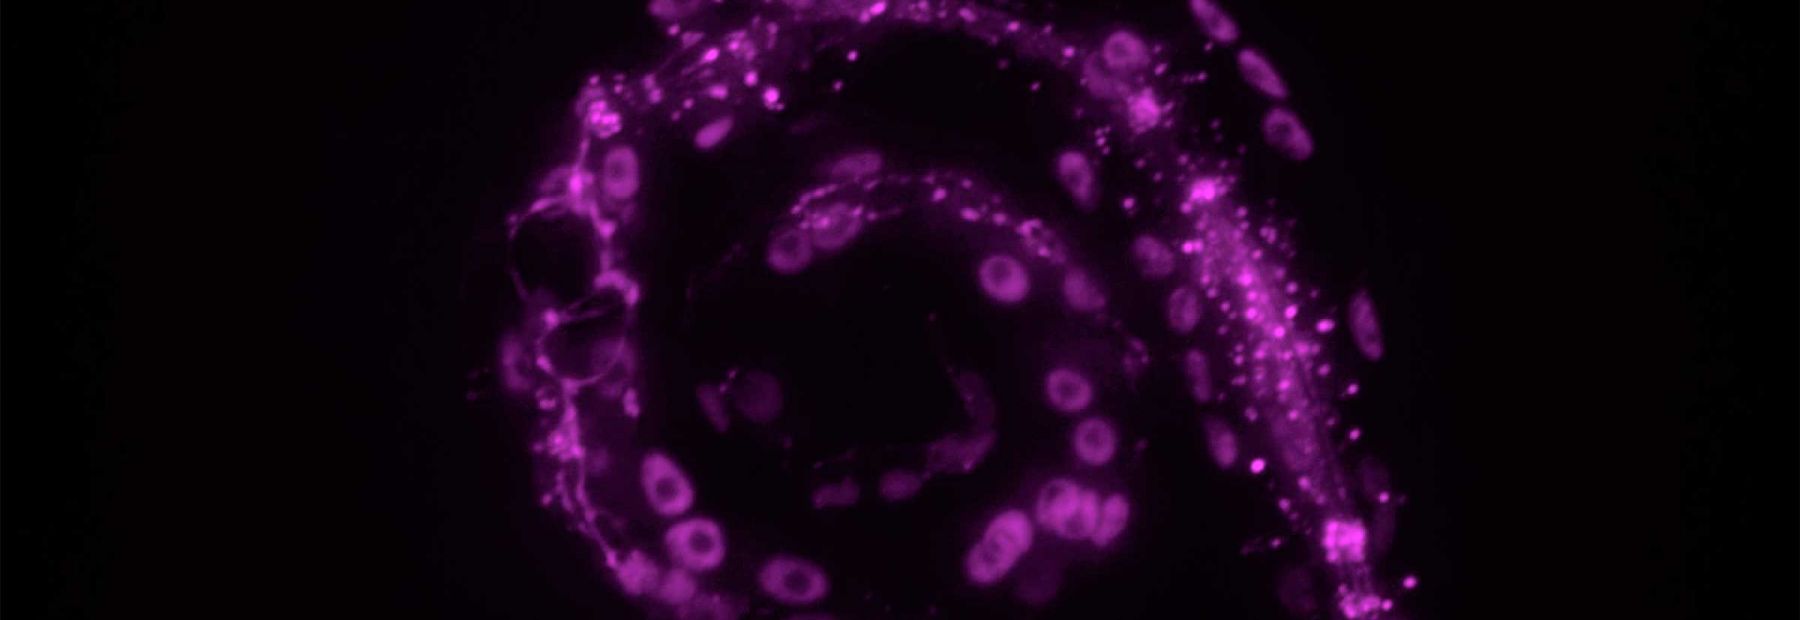  C. elegans with the digestive tract and muscle cells labeled with fluorescent marker. 